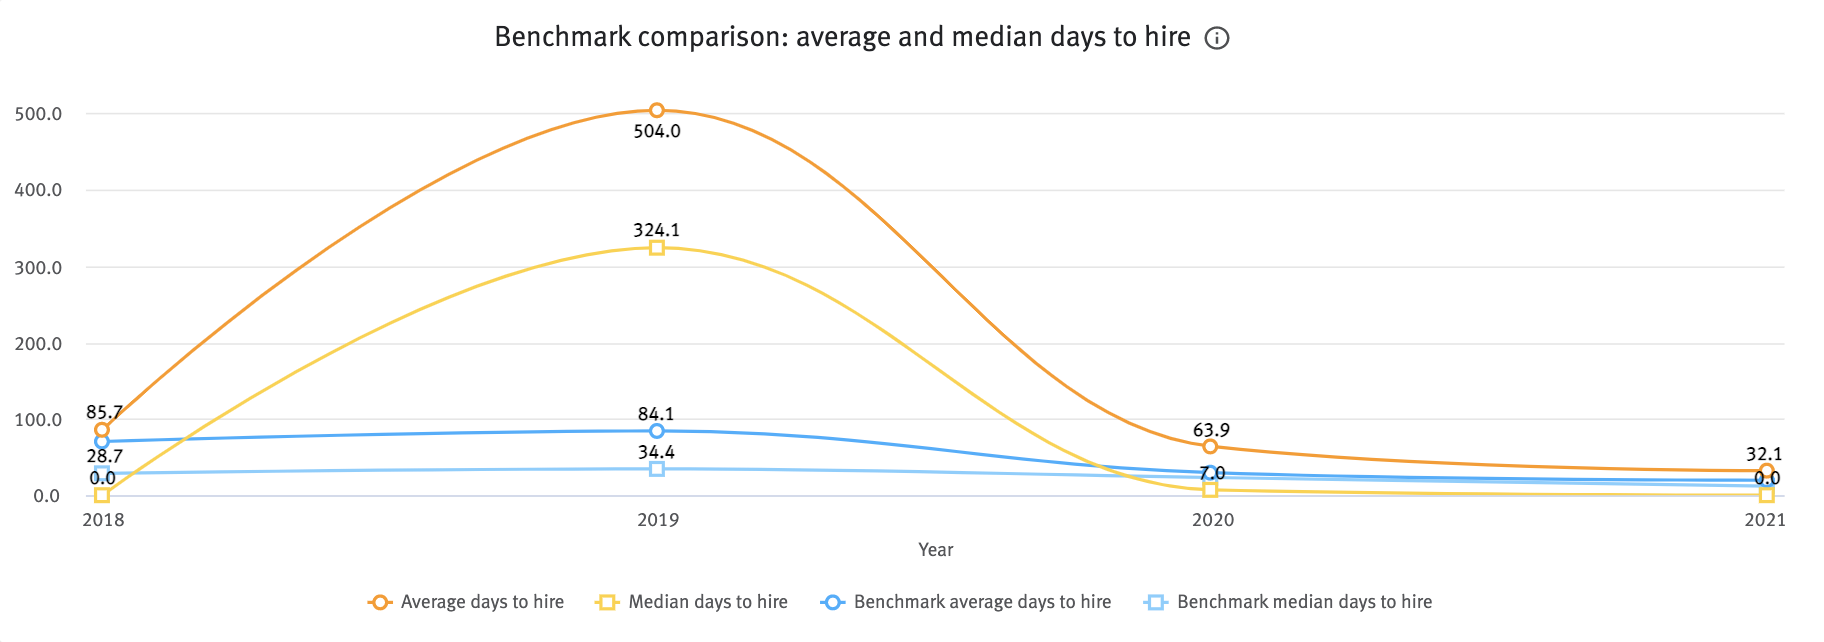 Benchmark comparison average and median days to hire chart